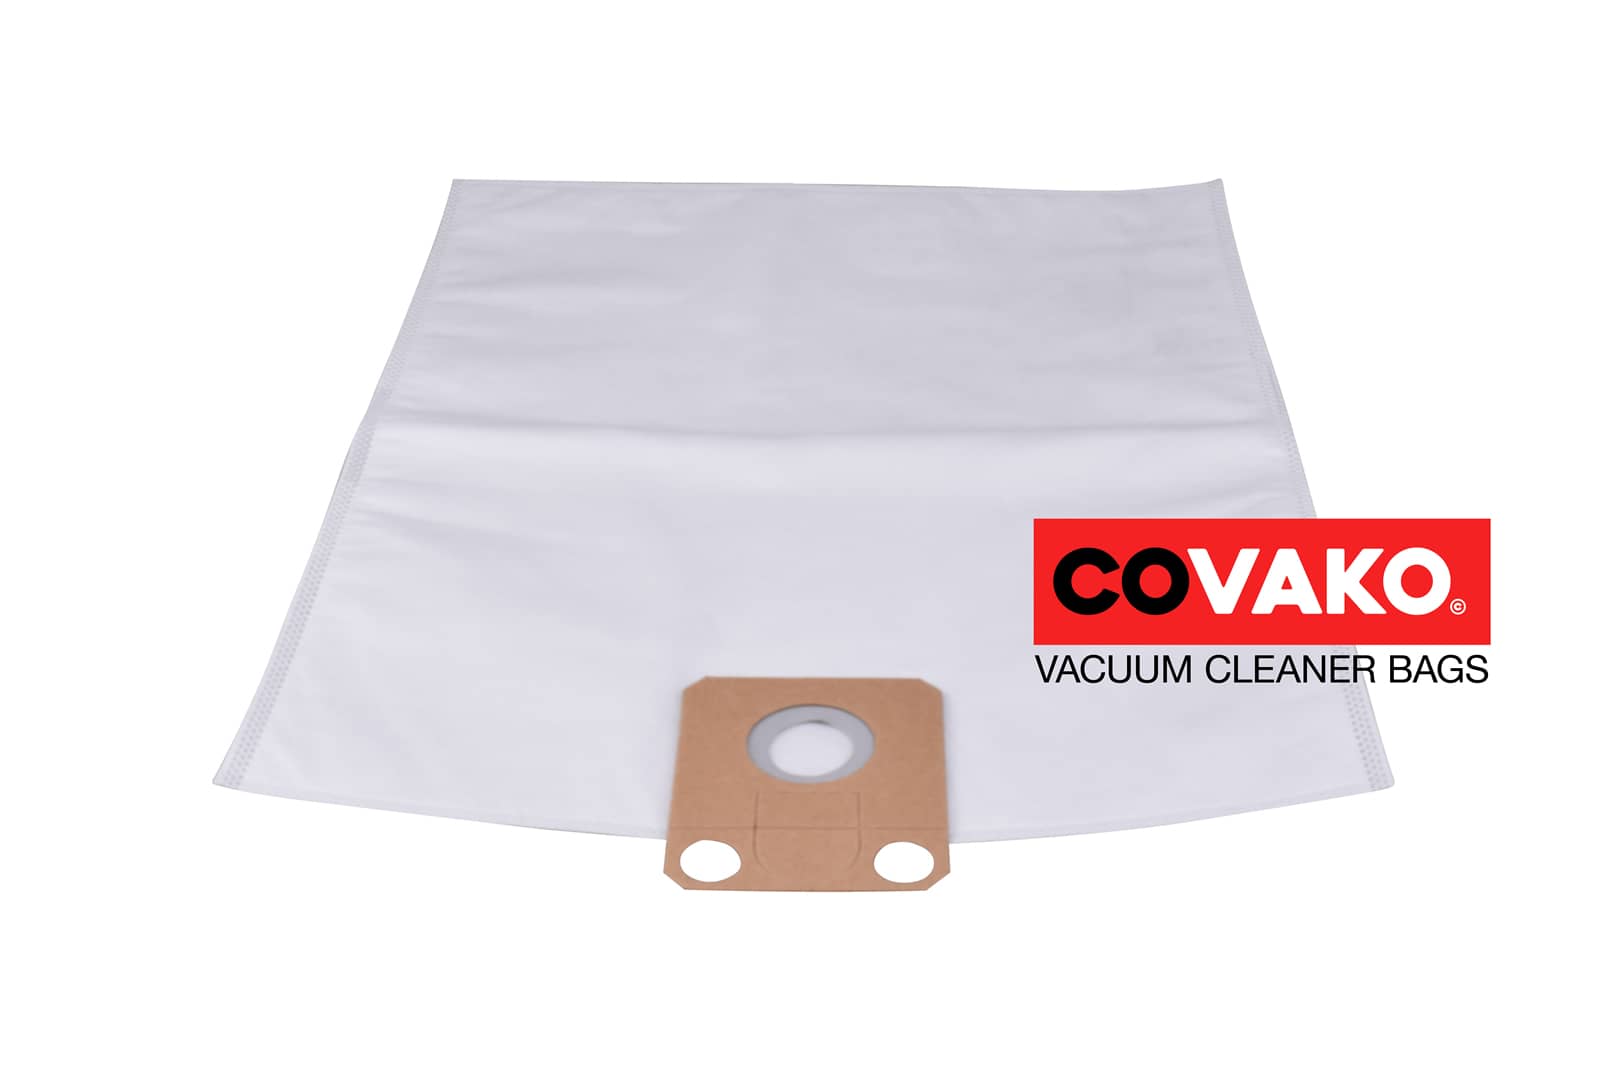 Alto VC 300 eco / Synthesis - Alto vacuum cleaner bags